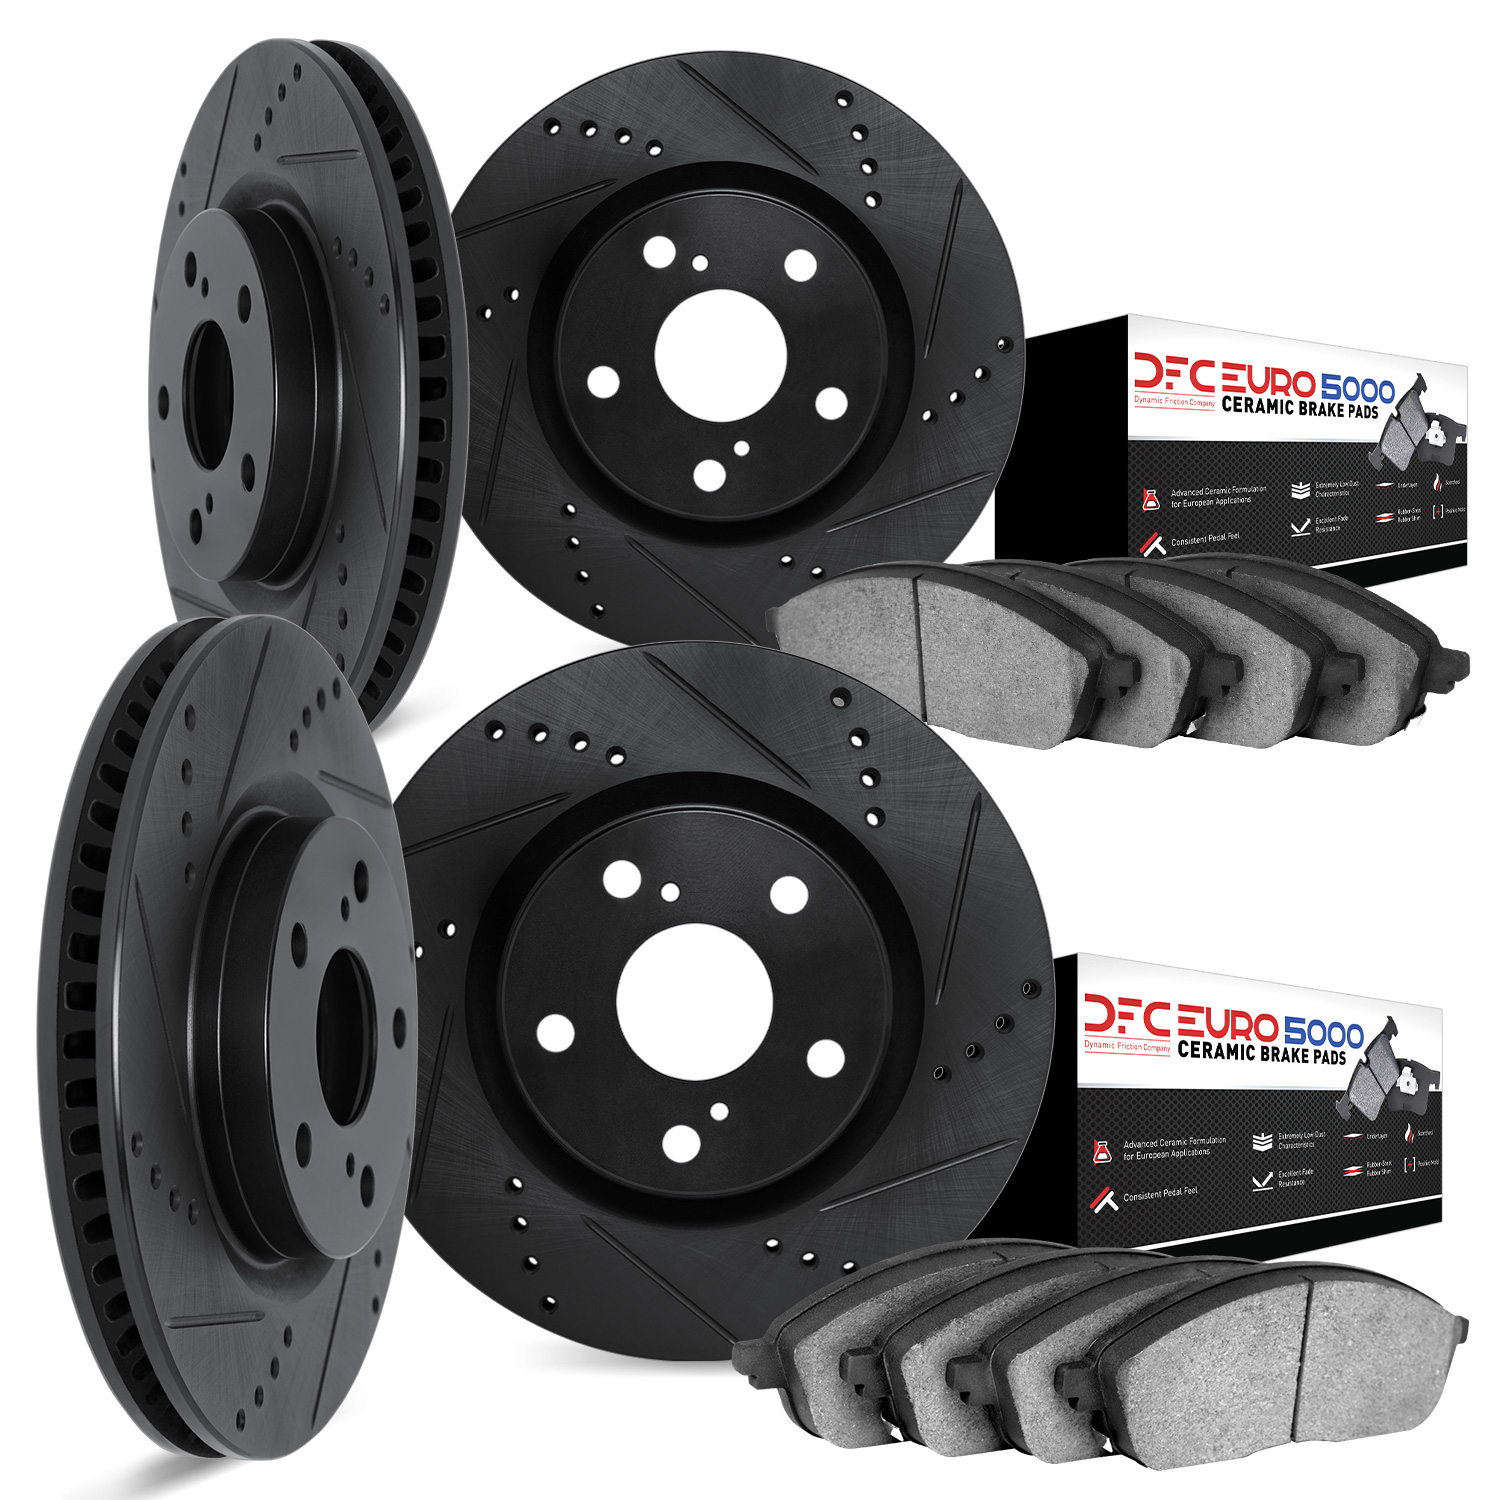 8604-31028 Drilled/Slotted Brake Rotors w/5000 Euro Ceramic Brake Pads Kit [Black], 2010-2017 BMW, Position: Front and Rear